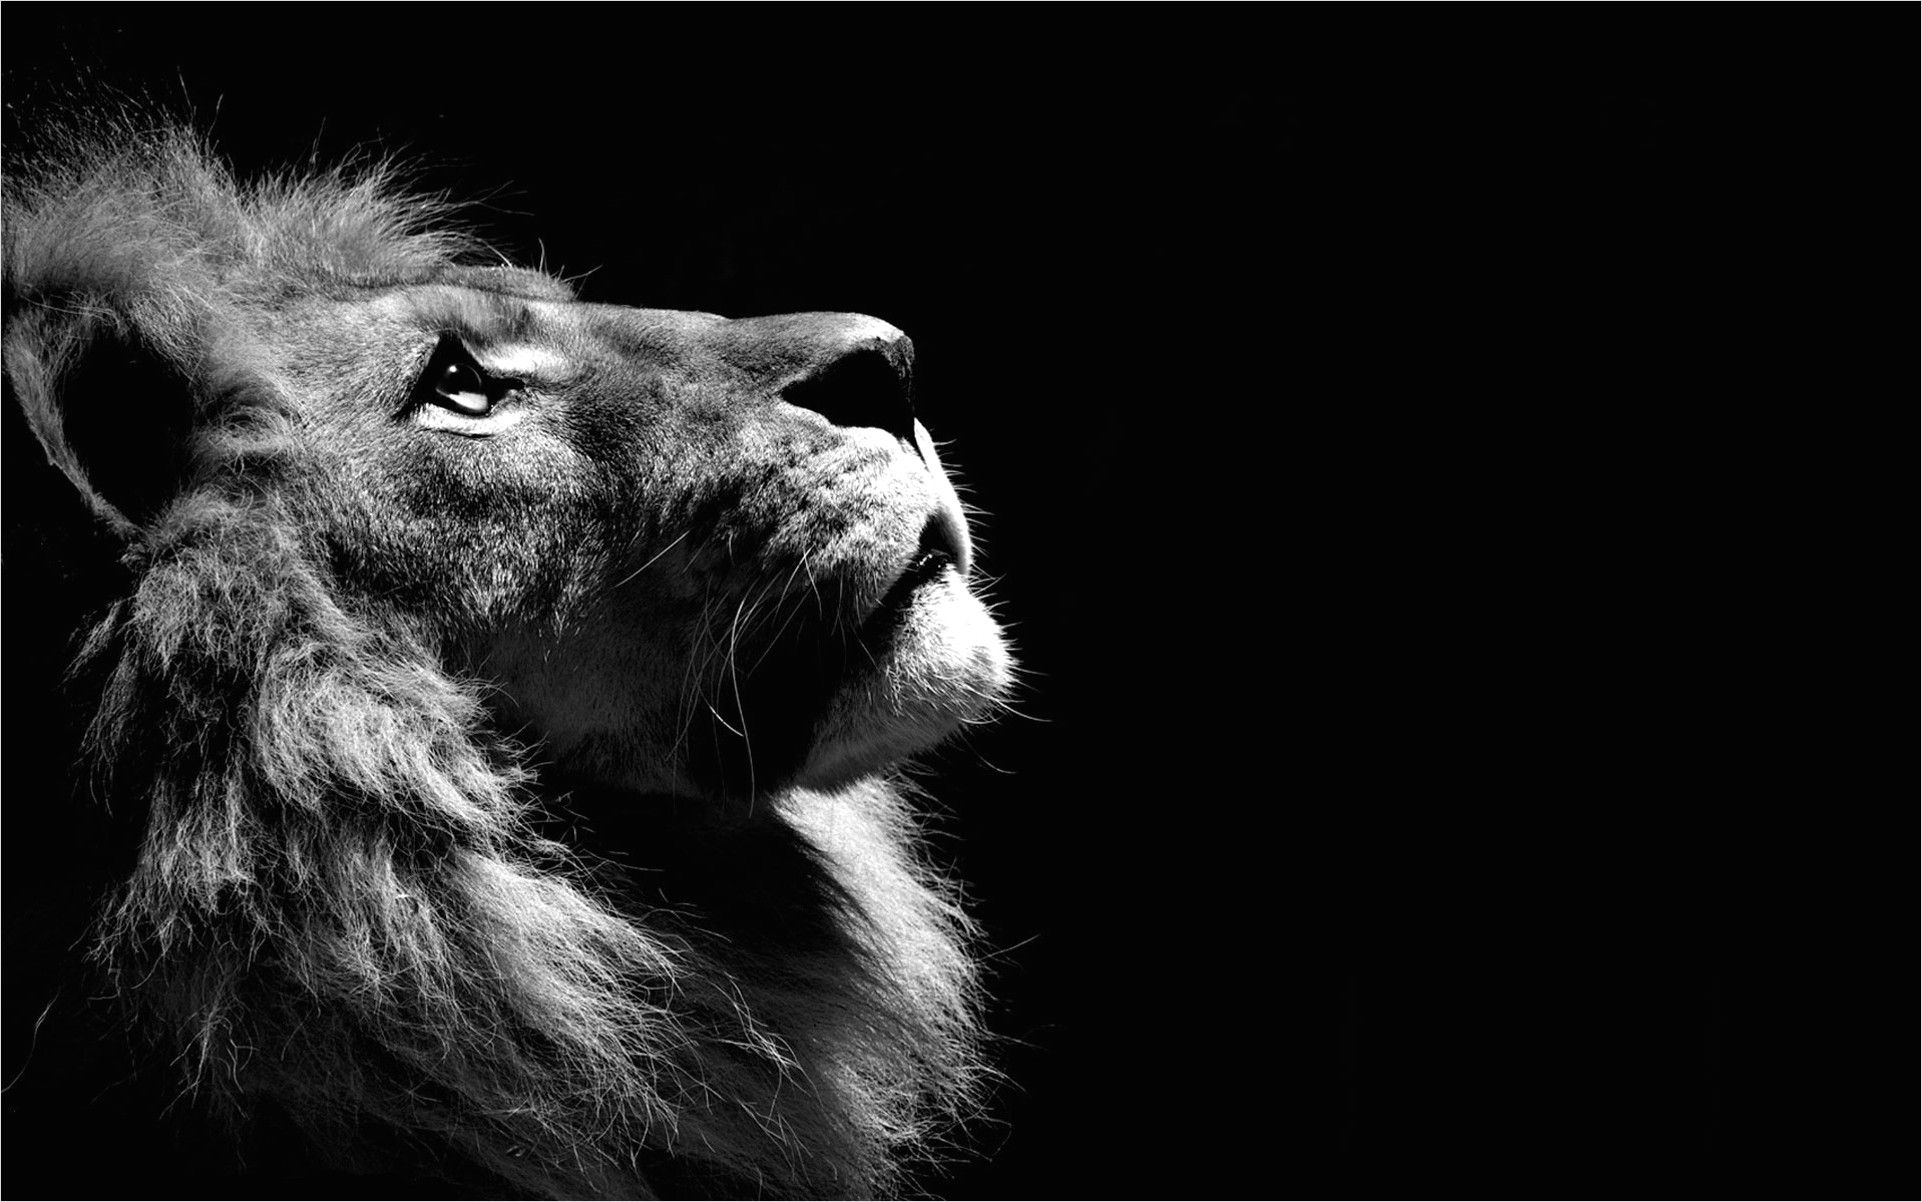 Lion Wallpapers HD Free download 